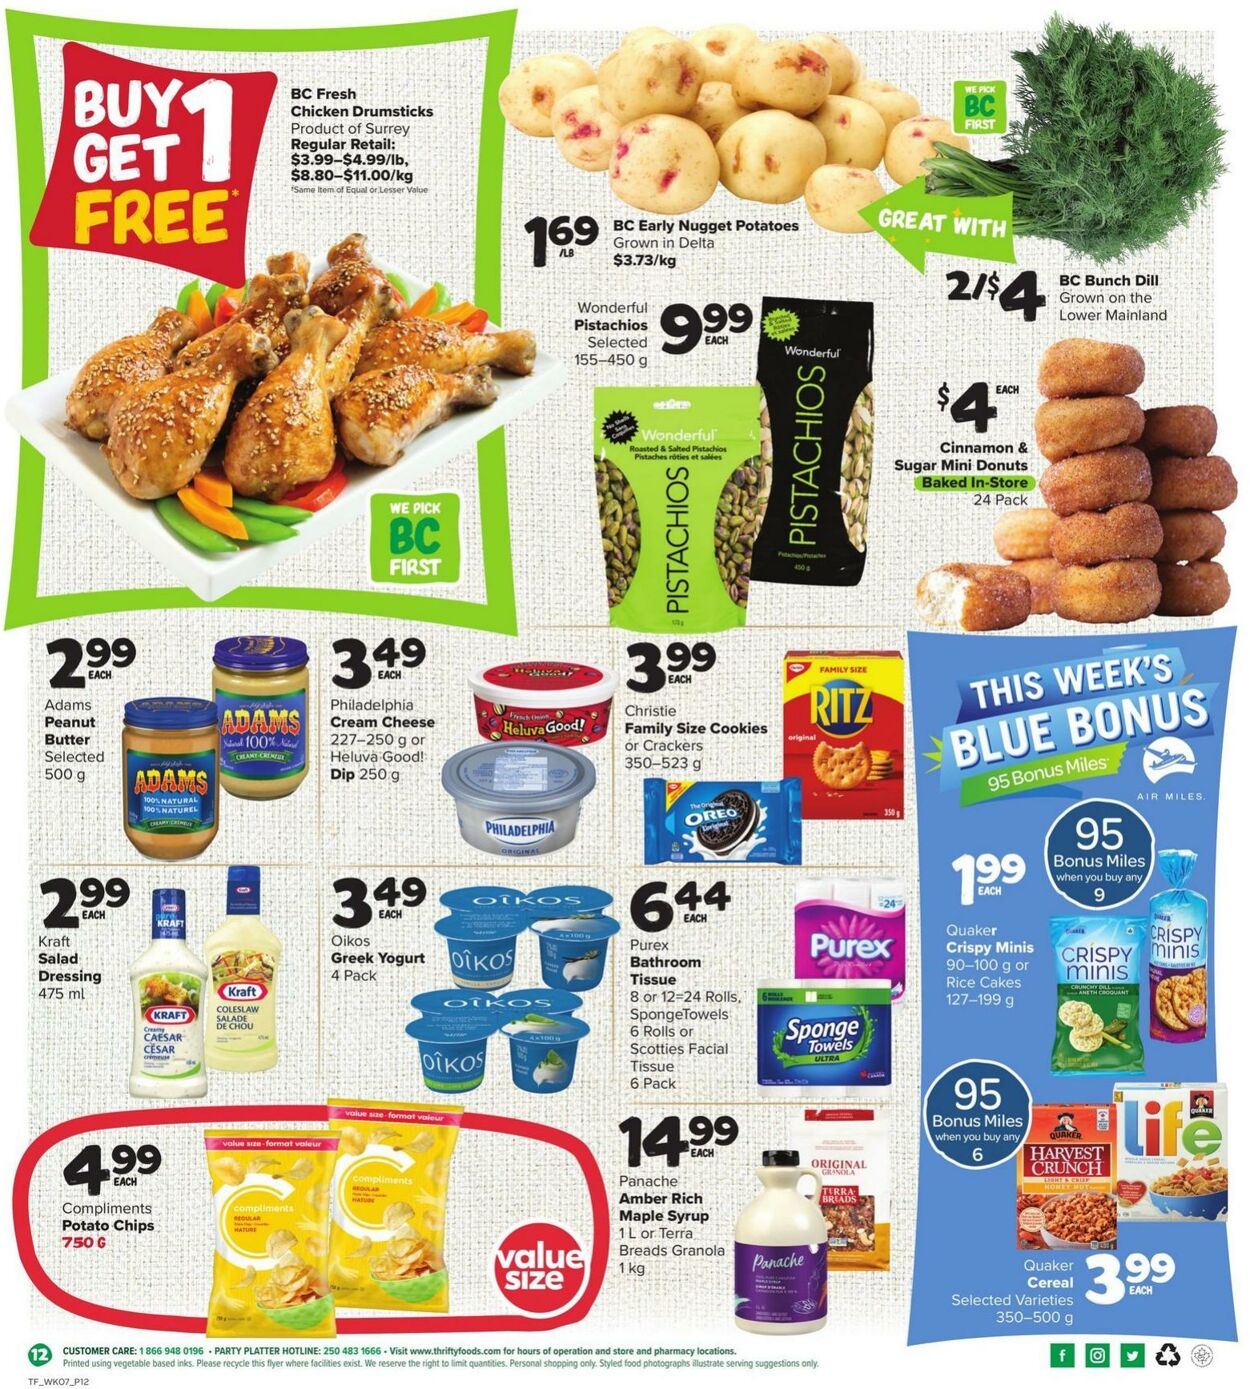 Circulaire Thrifty Foods 16.06.2022 - 22.06.2022